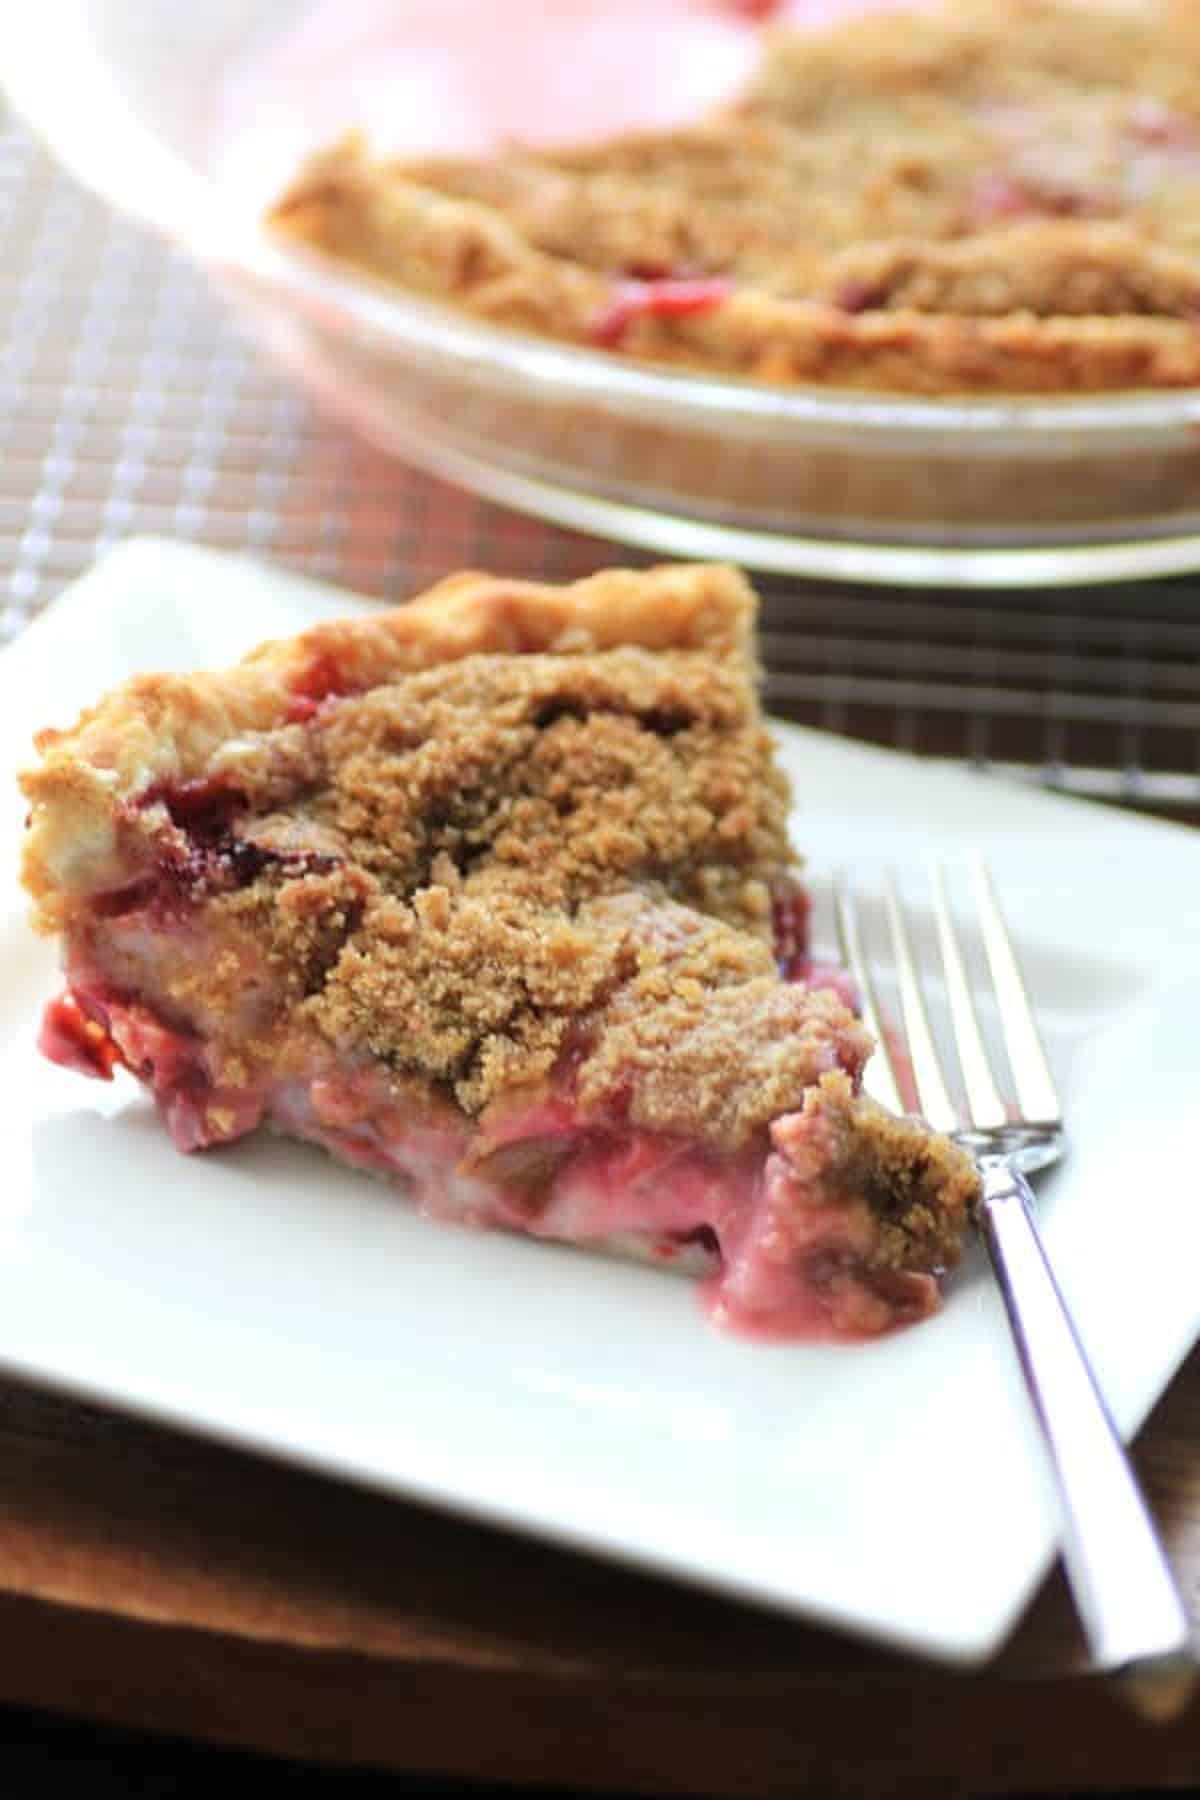 Rhubarb Strawberry Sour Cream Pie served on a white plate with fork.